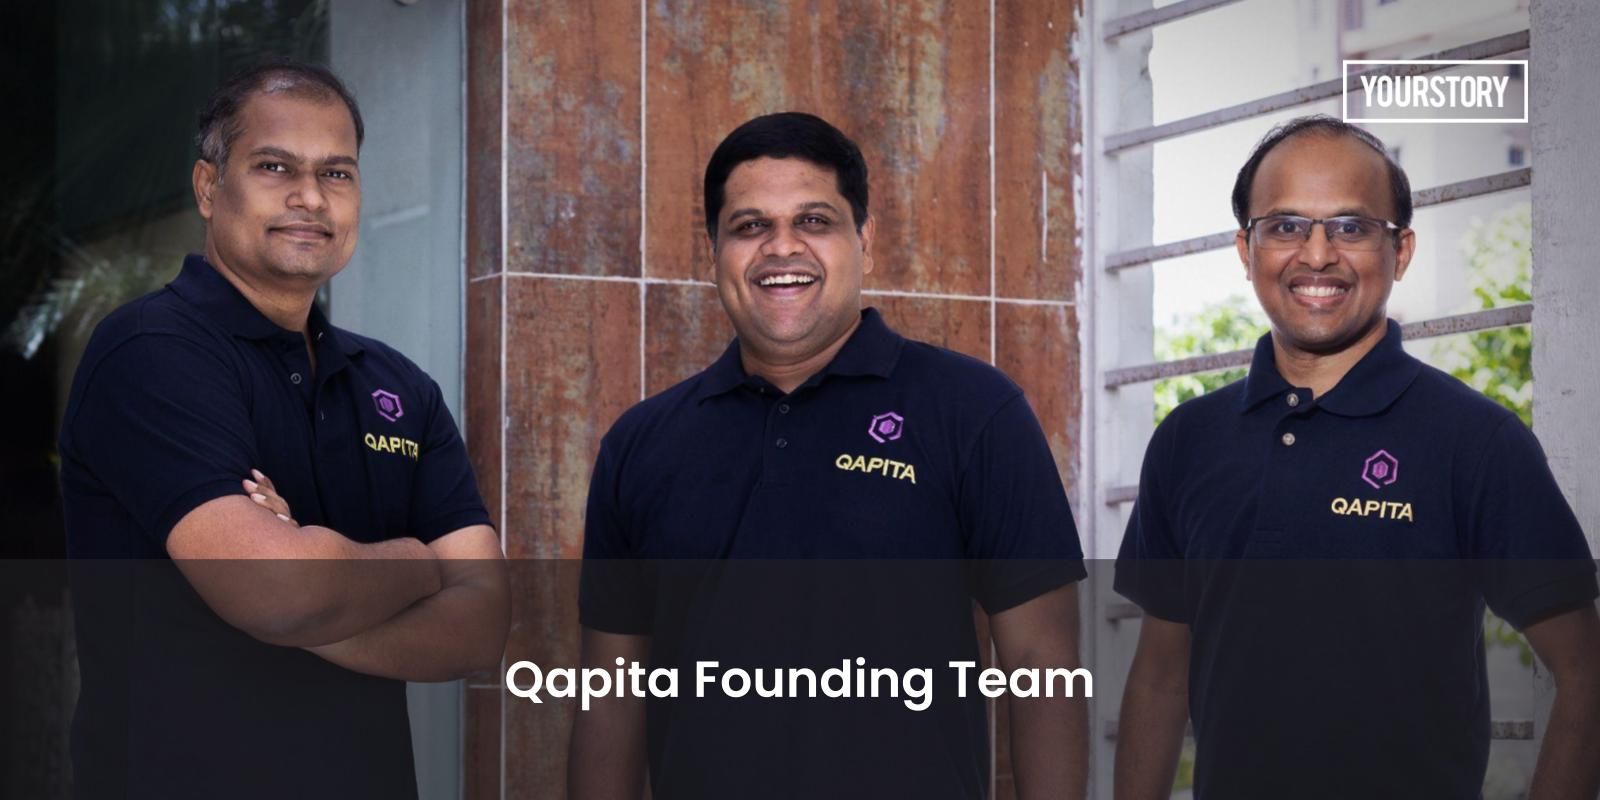 [Funding alert] Equity management platform Qapita raises $15M in Series A led by East Ventures and Vulcan Capital